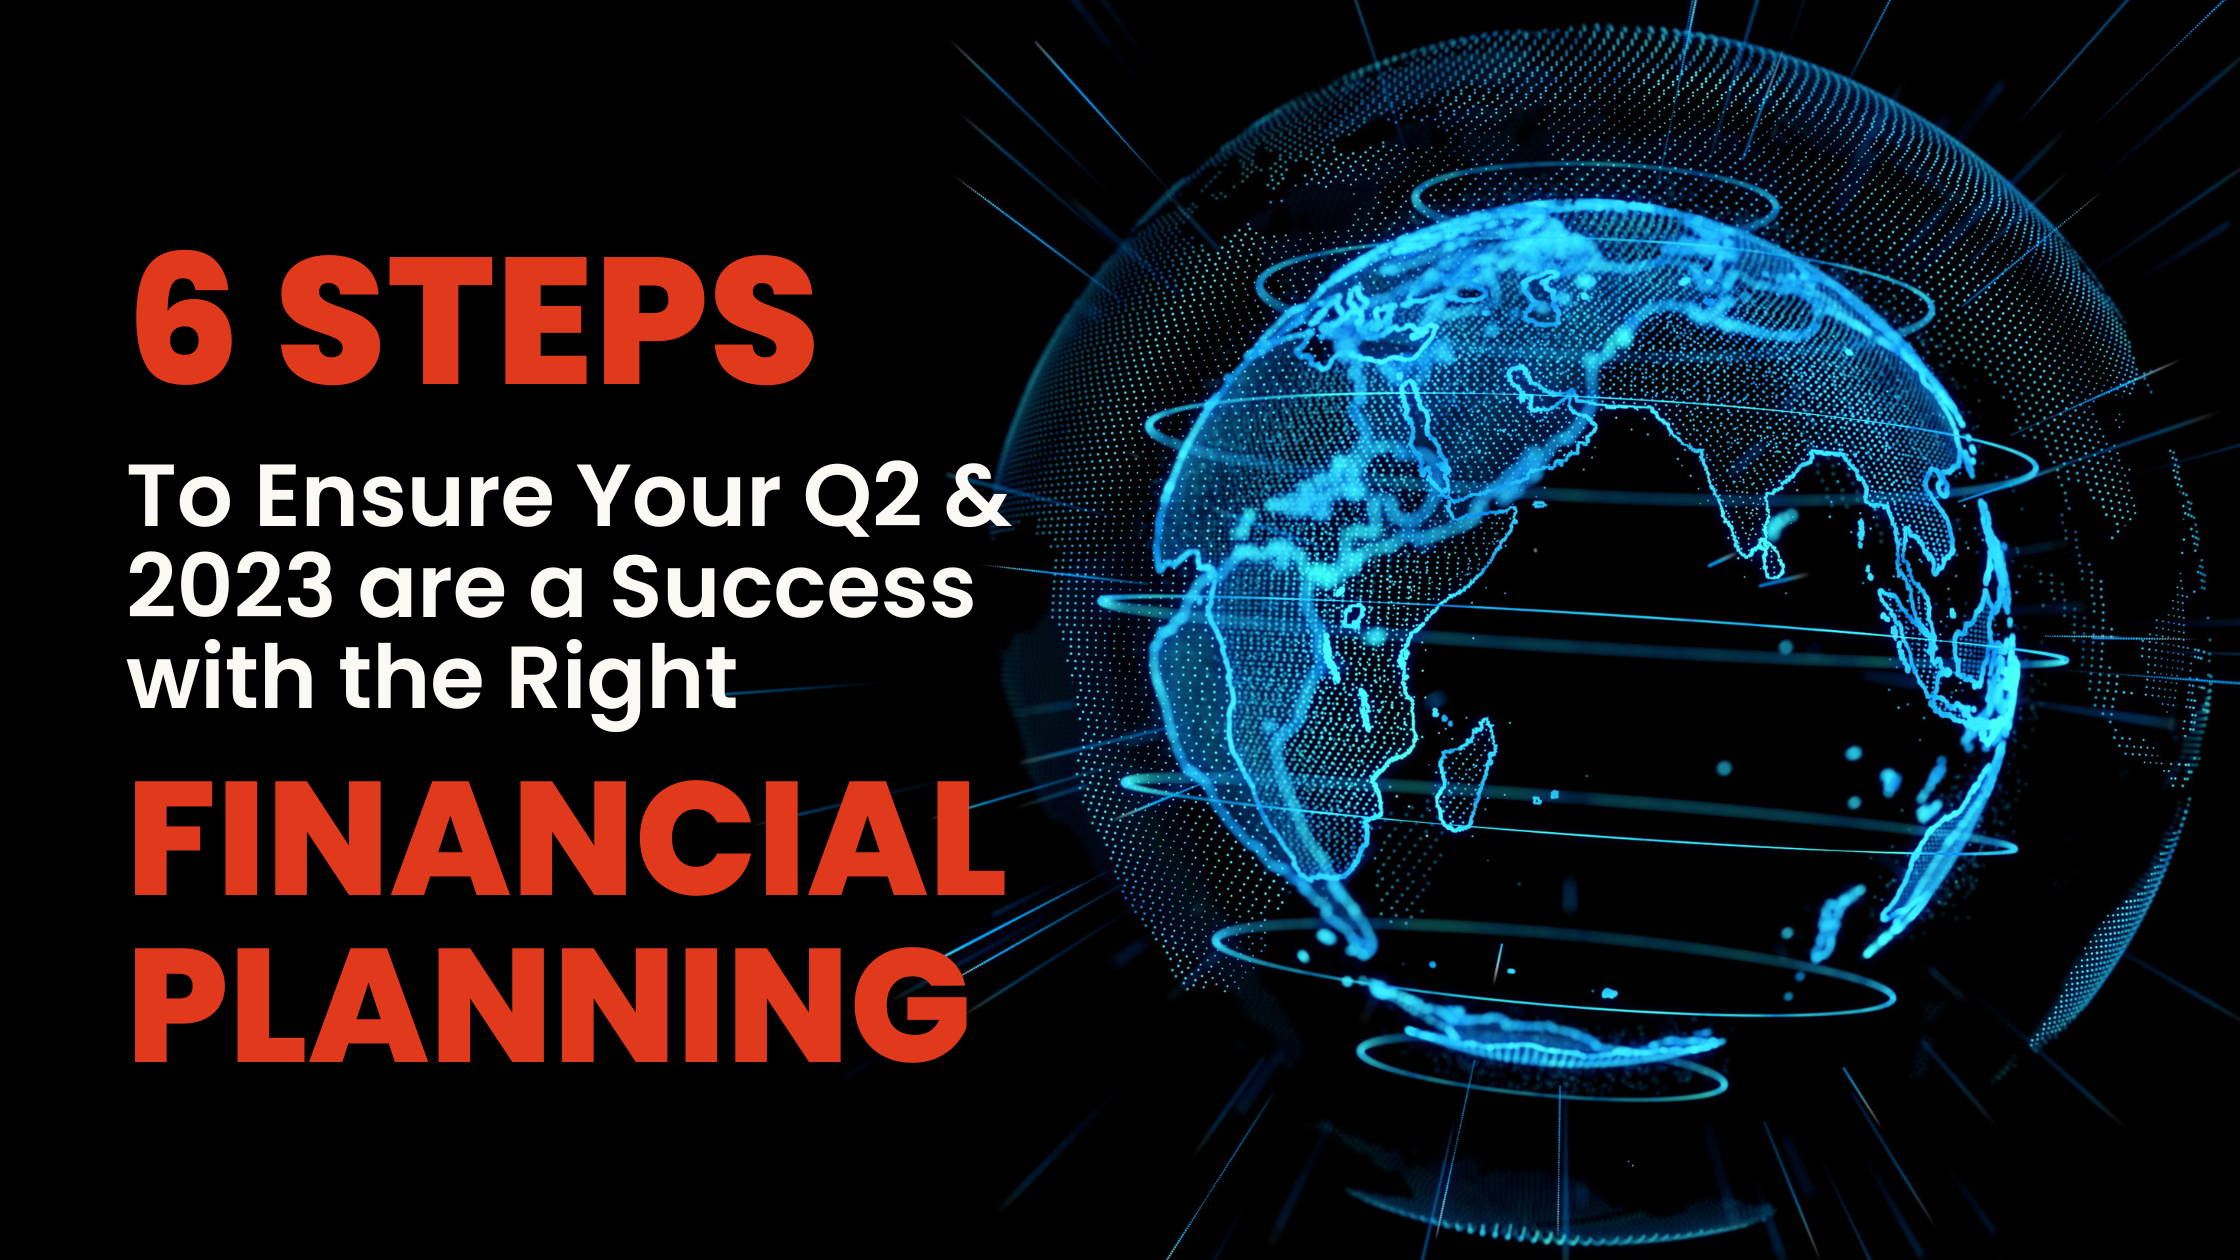 6 Steps to Ensure Your Q2 & 2023 are a Success with the Right Financial Planning